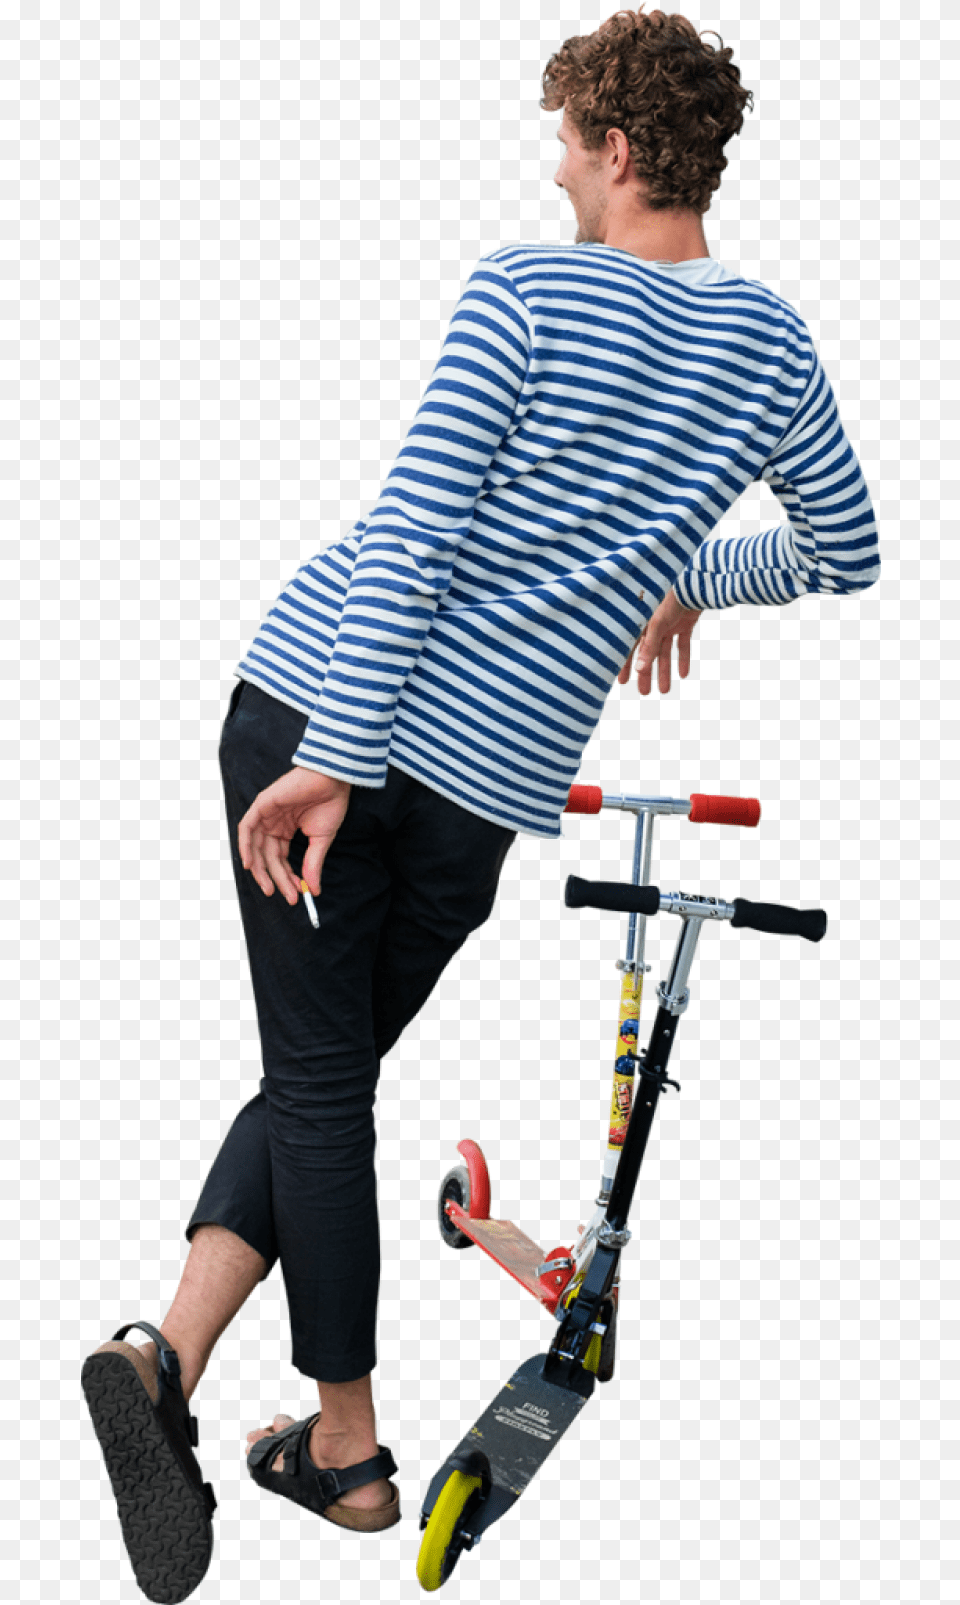 Leaning And Smoking Image Purepng People Leaning, Vehicle, Transportation, Scooter, Person Free Transparent Png